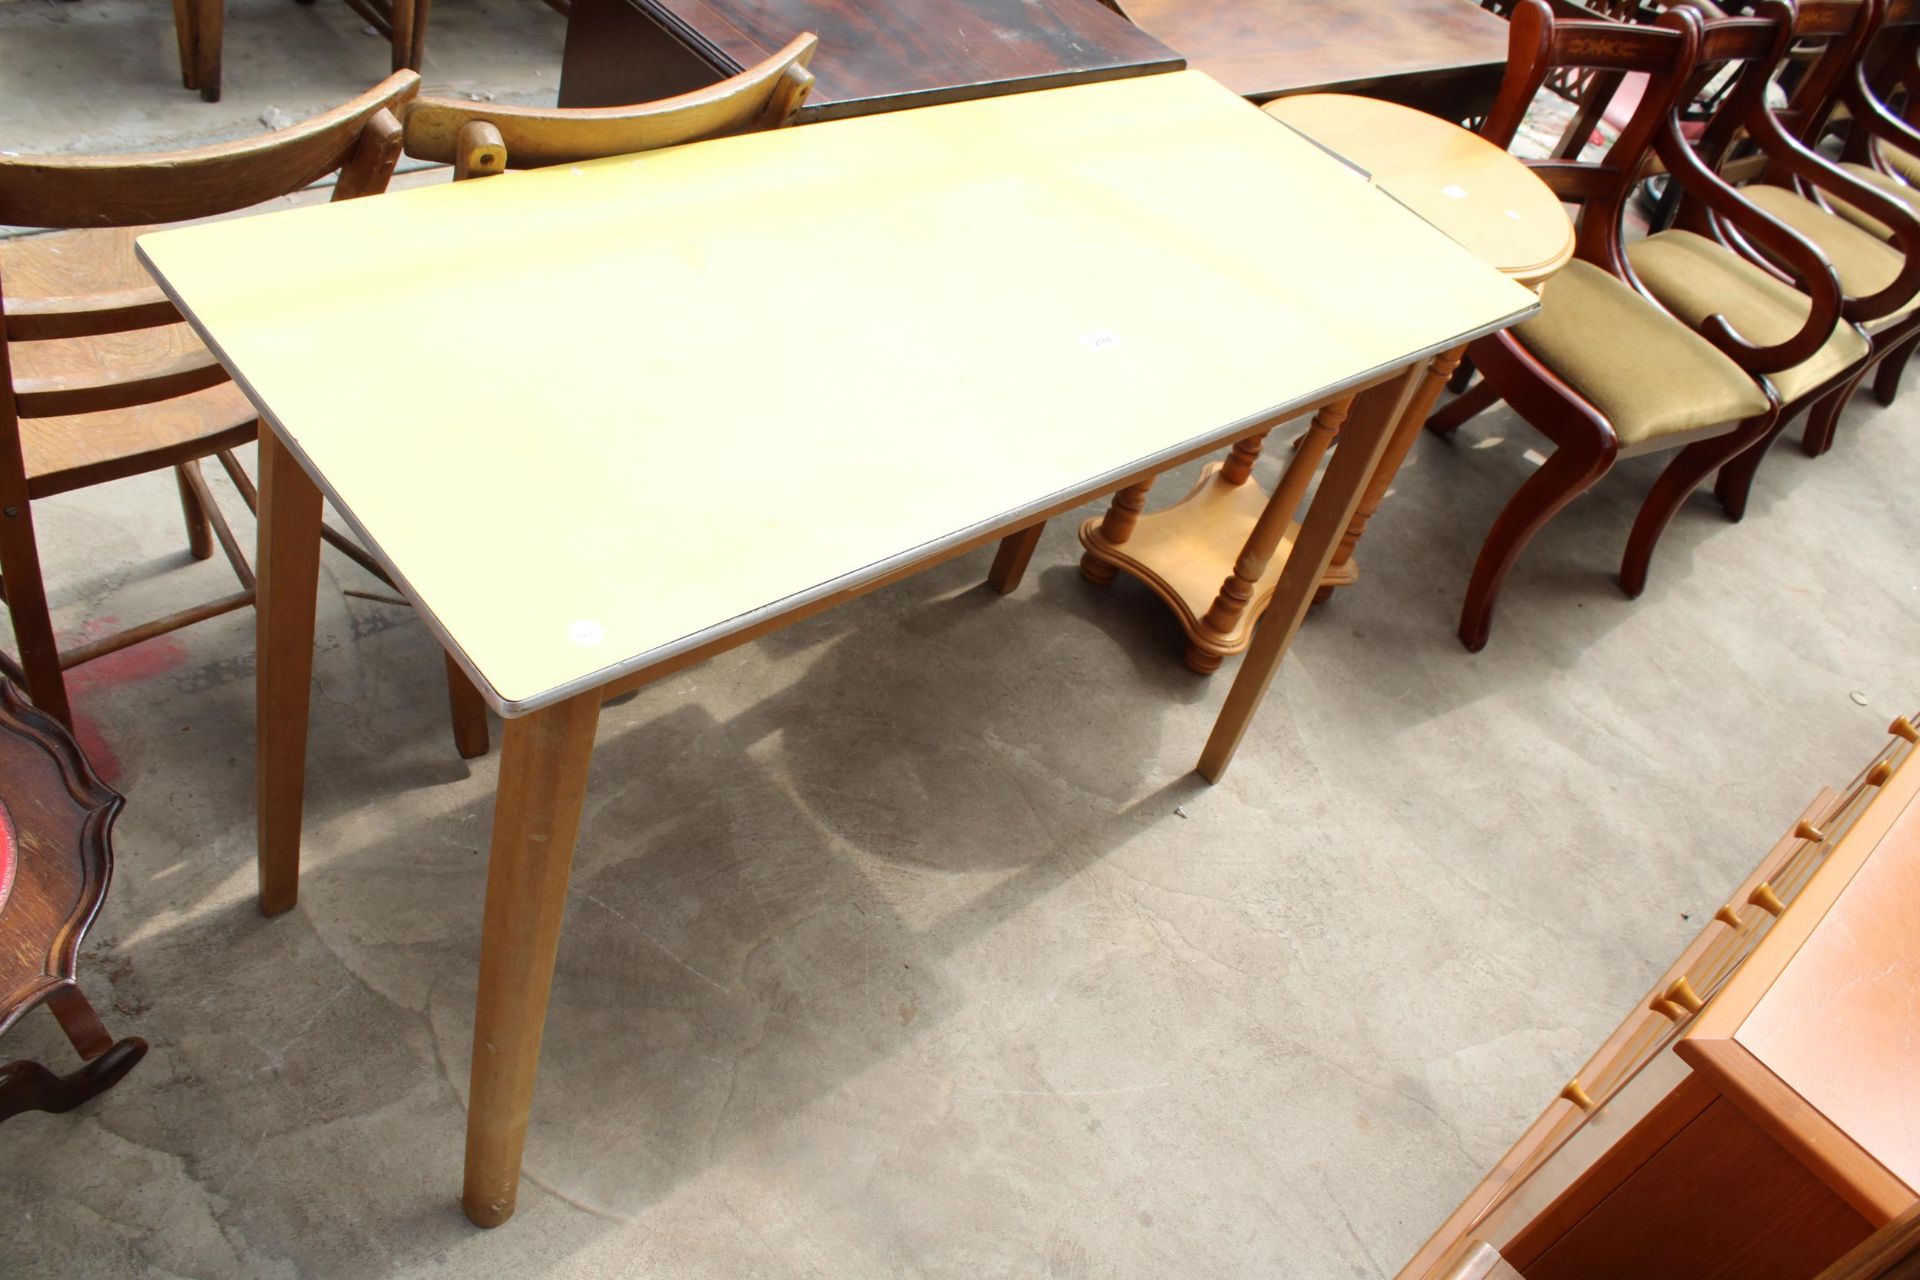 A MID 20TH CENTURY FORMICA TOP KITCHEN TABLE, 48" 20"